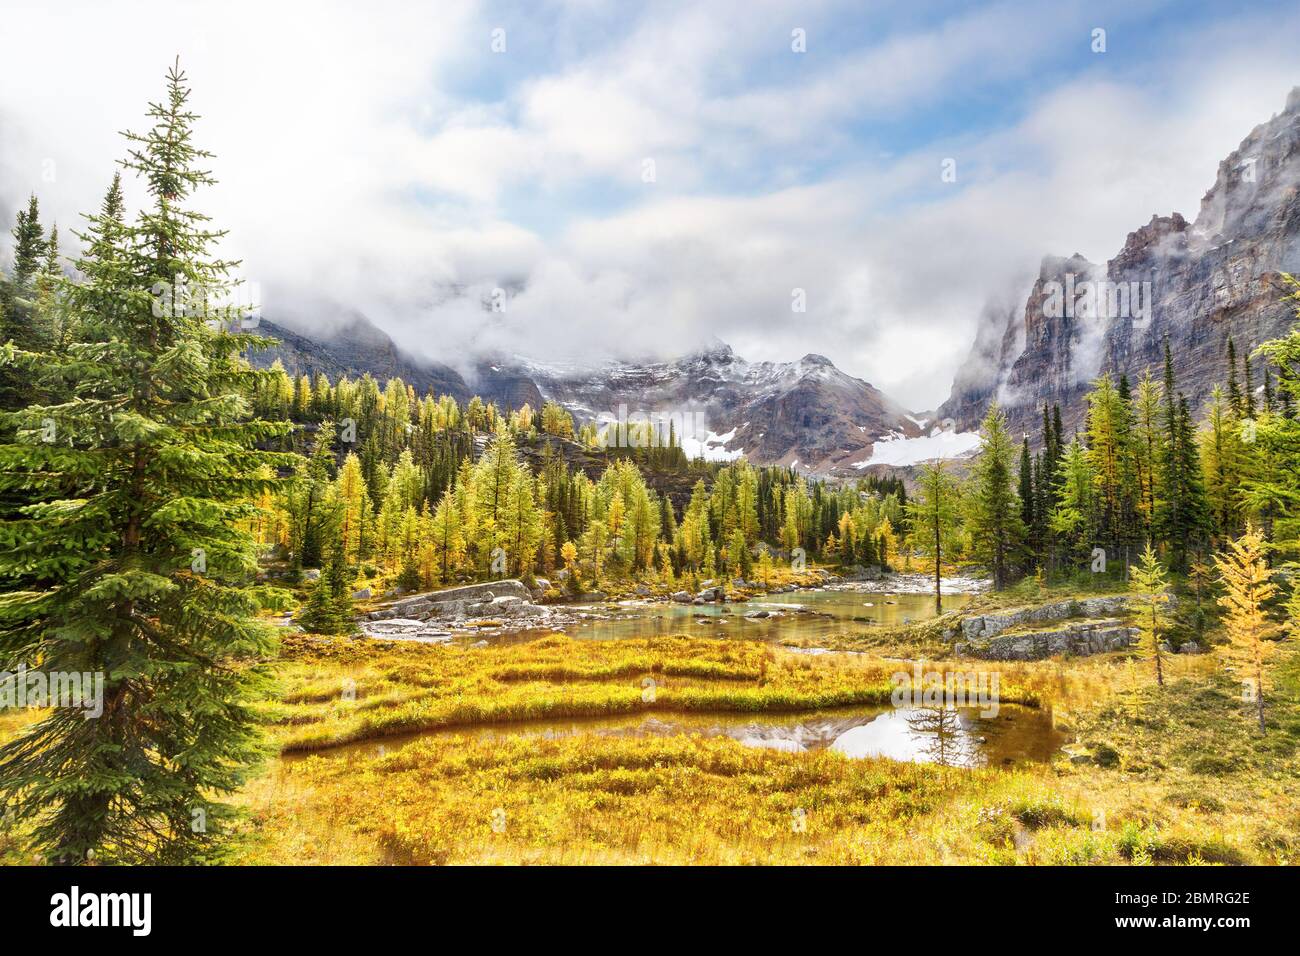 Autumn scene at Lake O'Hara in the Canadian Rockies of Yoho National Park with golden larch trees and low clouds hanging over Yukness Mountain in the Stock Photo